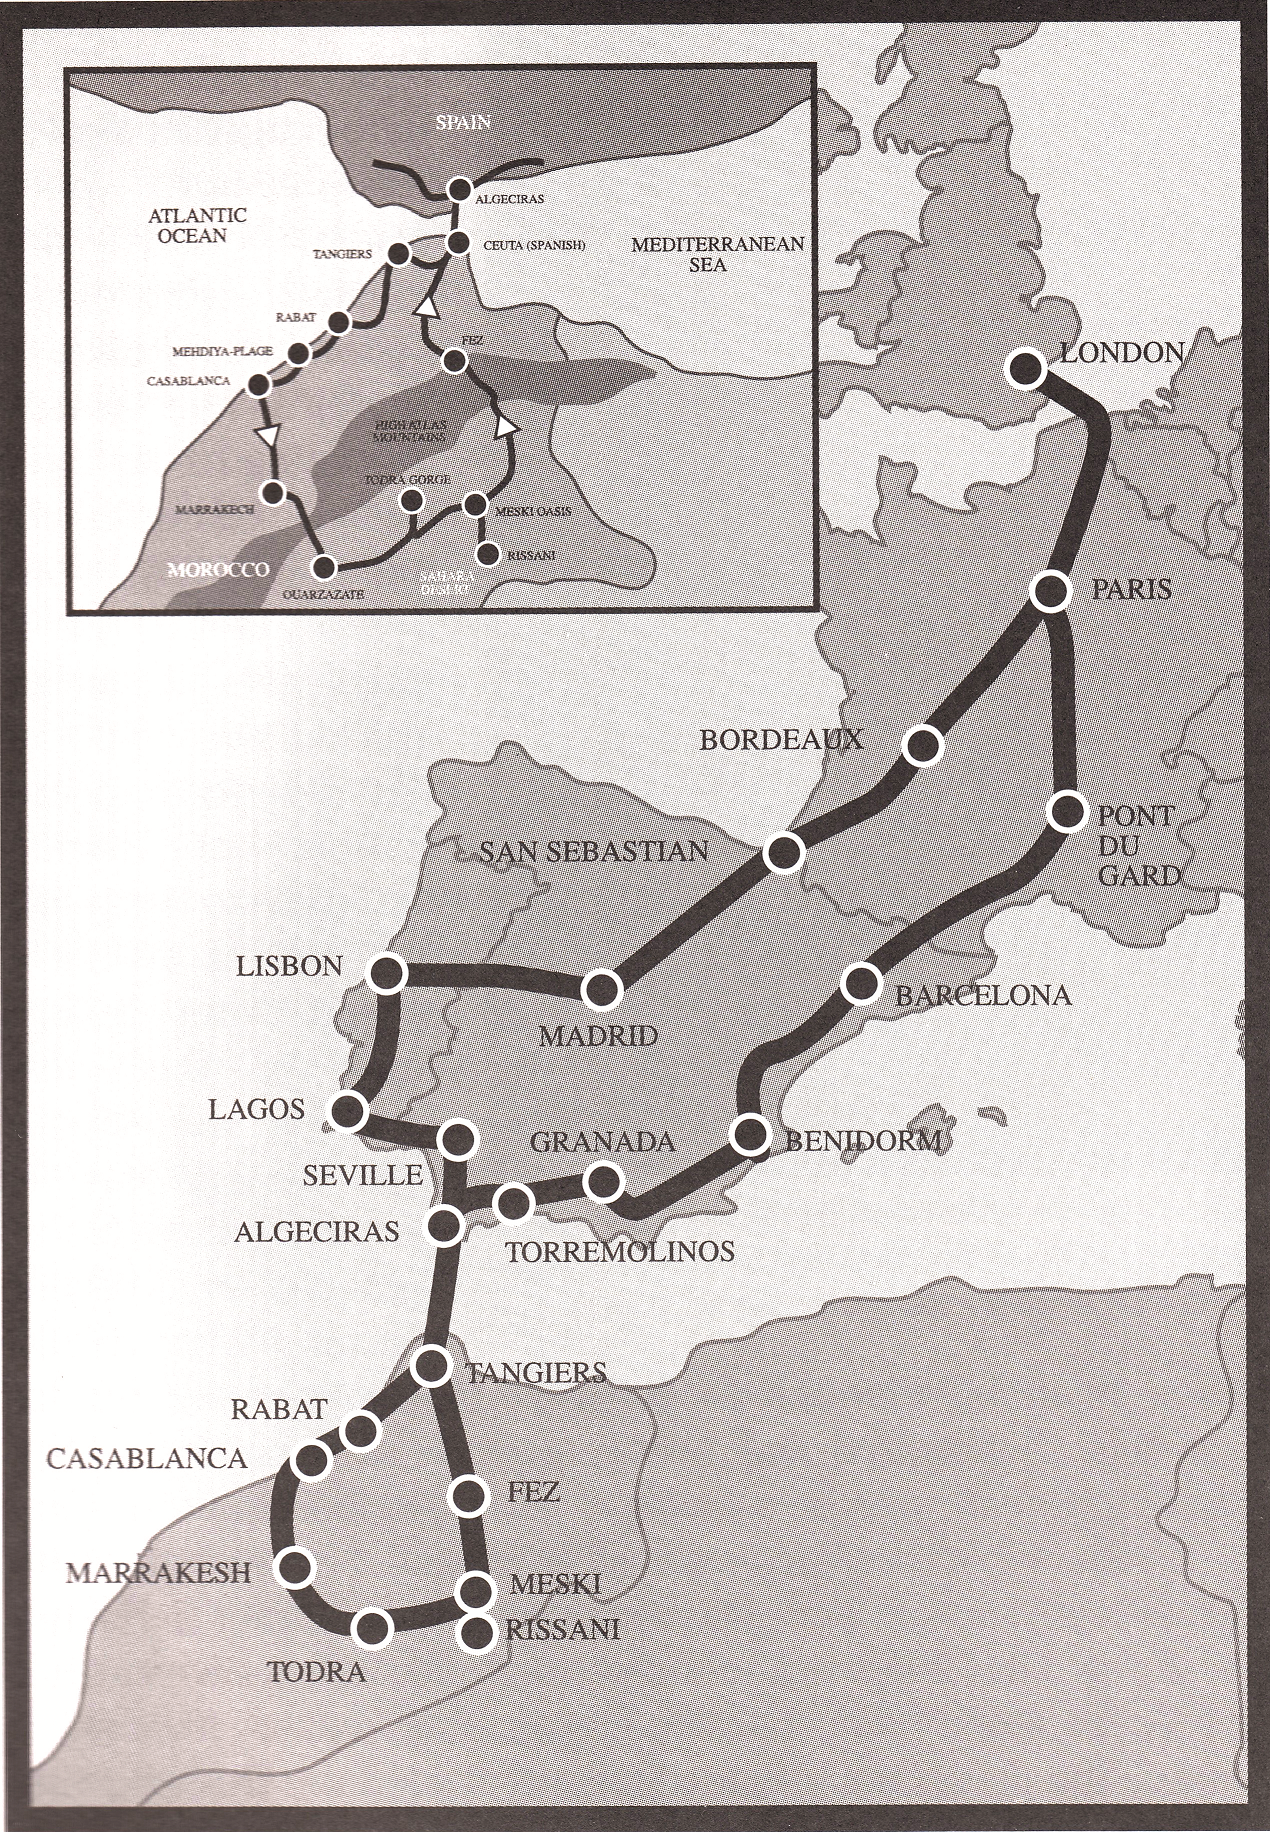 The itinerary for Top Deck Travel’s first tour to Morocco was nothing if not ambitious. Image courtesy of BILL JAMES